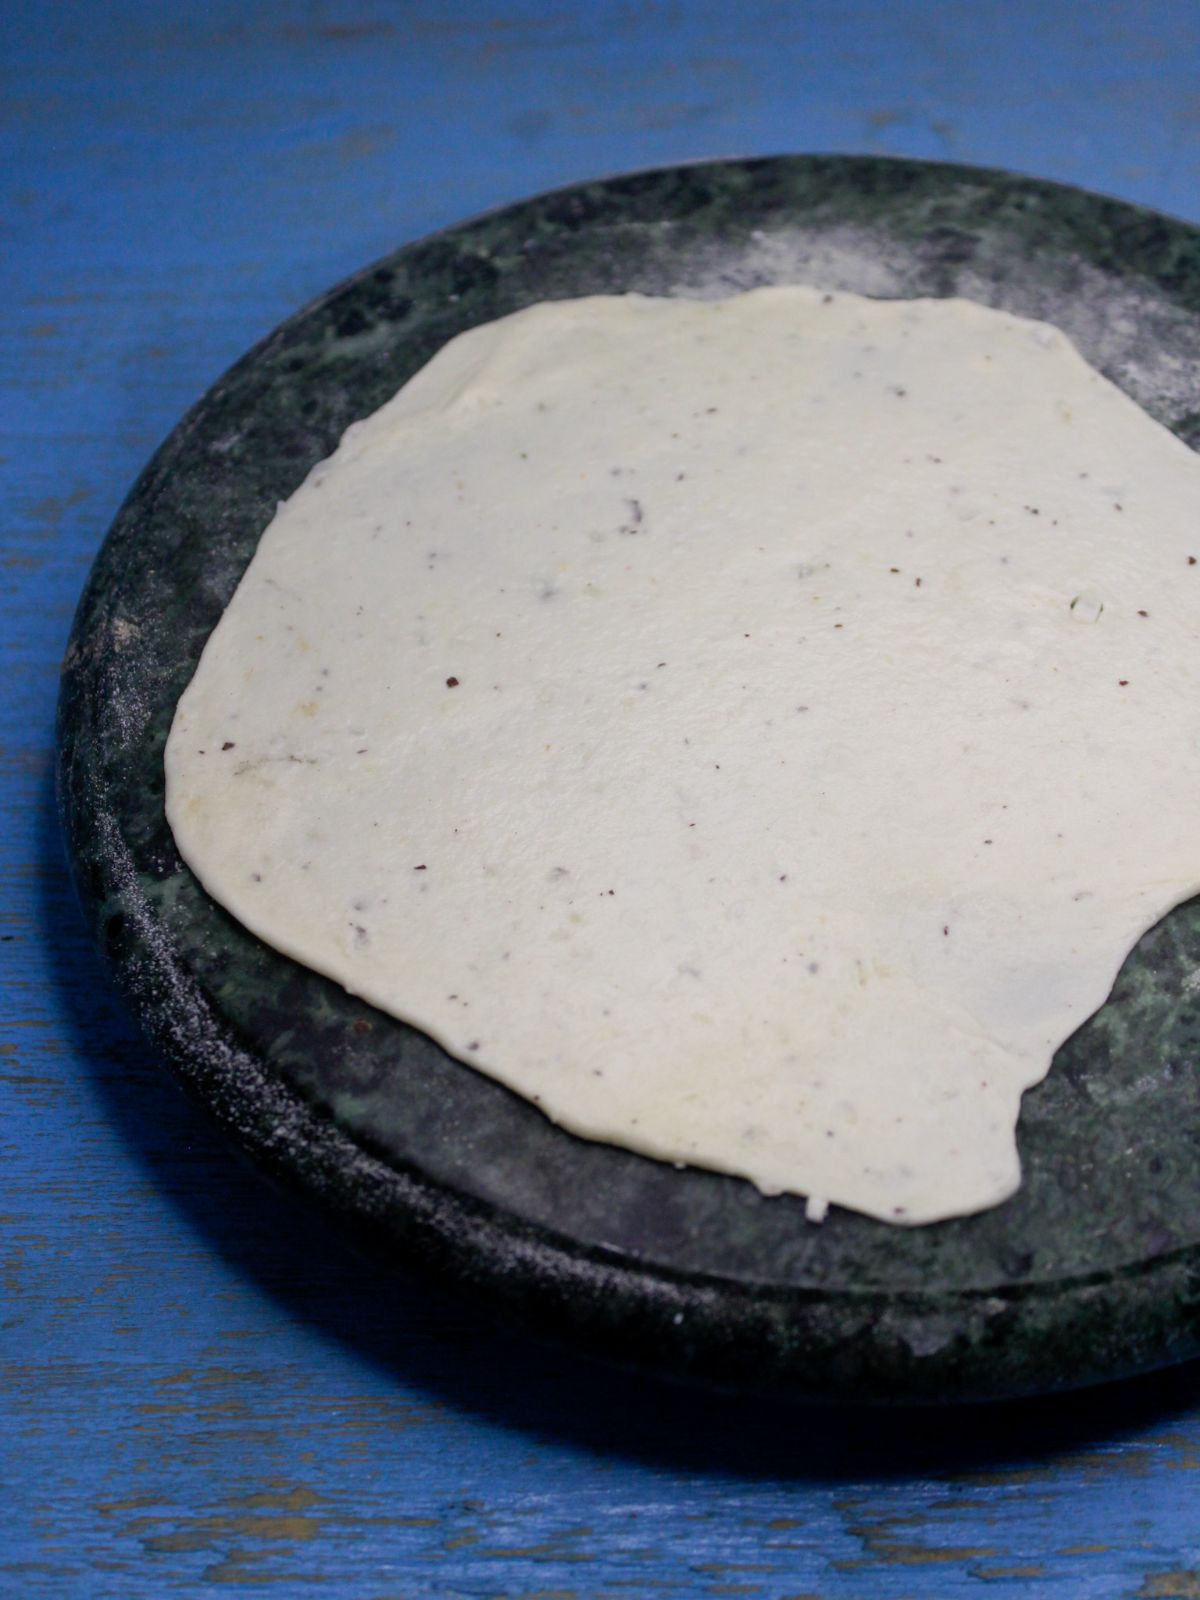 make rotis of the small portion of dough and trf it to the skillet